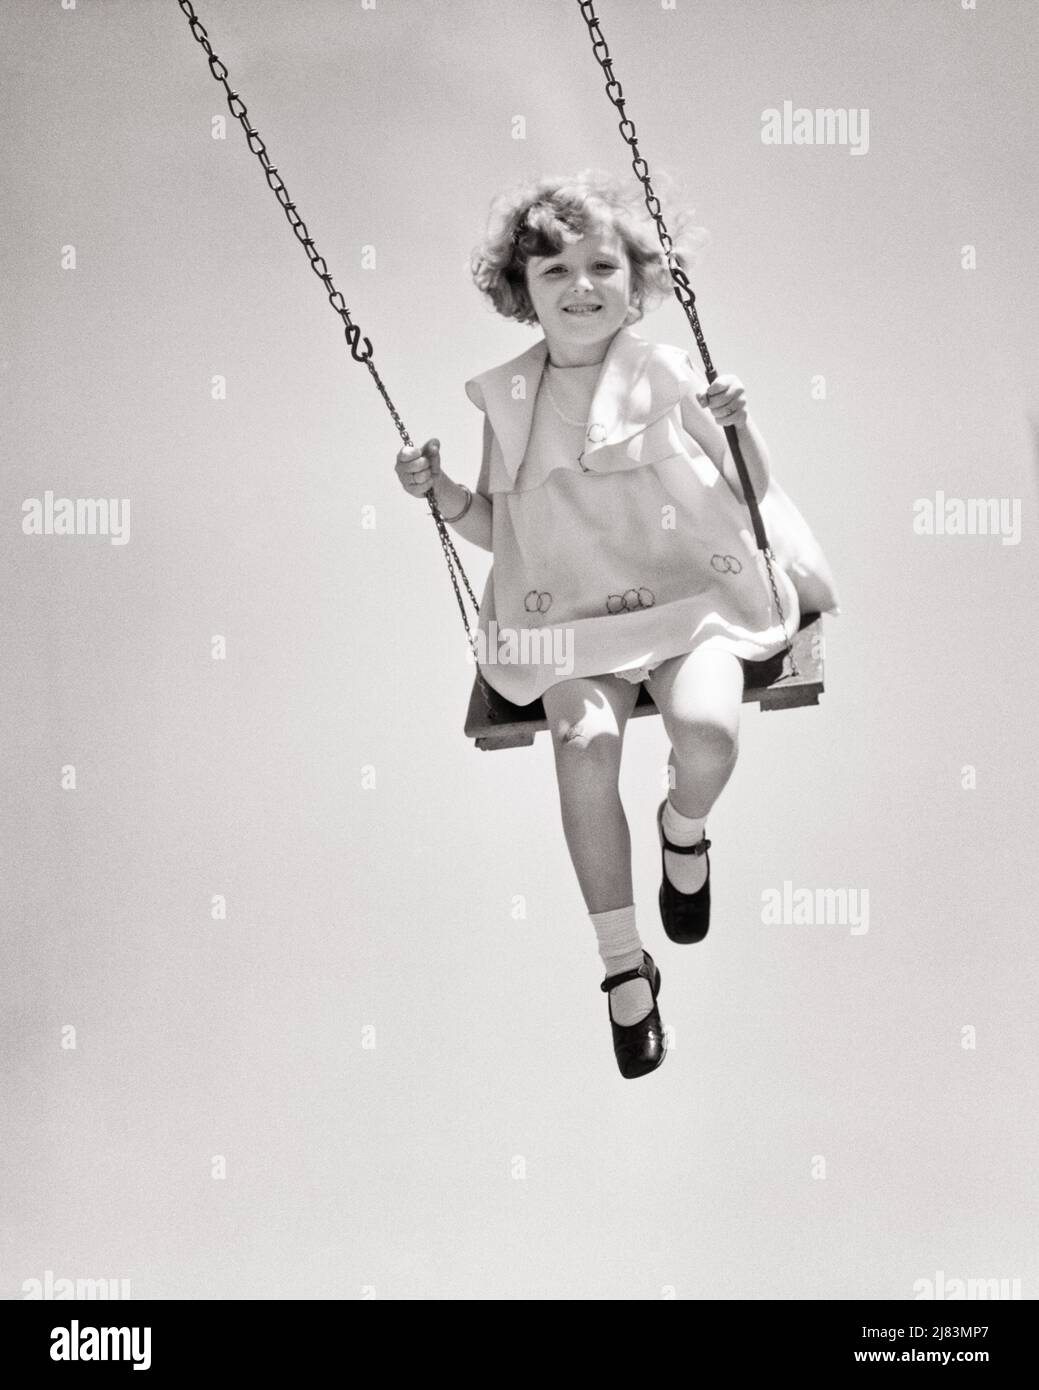 1920s 1930s SMILING LITTLE GIRL LOOKING AT CAMERA WEARING DRESS AND MARY JANE SHOES SWINGING HIGH ON PARK PLAYGROUND SWING - j3585 HAR001 HARS COMPETITION PLEASED JOY LIFESTYLE SPEED FEMALES HEALTHINESS COPY SPACE FULL-LENGTH RISK CONFIDENCE B&W EYE CONTACT SUCCESS ACTIVITY HAPPINESS PHYSICAL WELLNESS CHEERFUL STRENGTH COURAGE AND CHOICE EXCITEMENT LOW ANGLE RECREATION MARY JANE ON SMILES SWINGING GRAVITY CONCEPTUAL FLEXIBILITY JOYFUL MUSCLES STYLISH GROWTH JUVENILES BLACK AND WHITE CAUCASIAN ETHNICITY HAR001 OLD FASHIONED Stock Photo